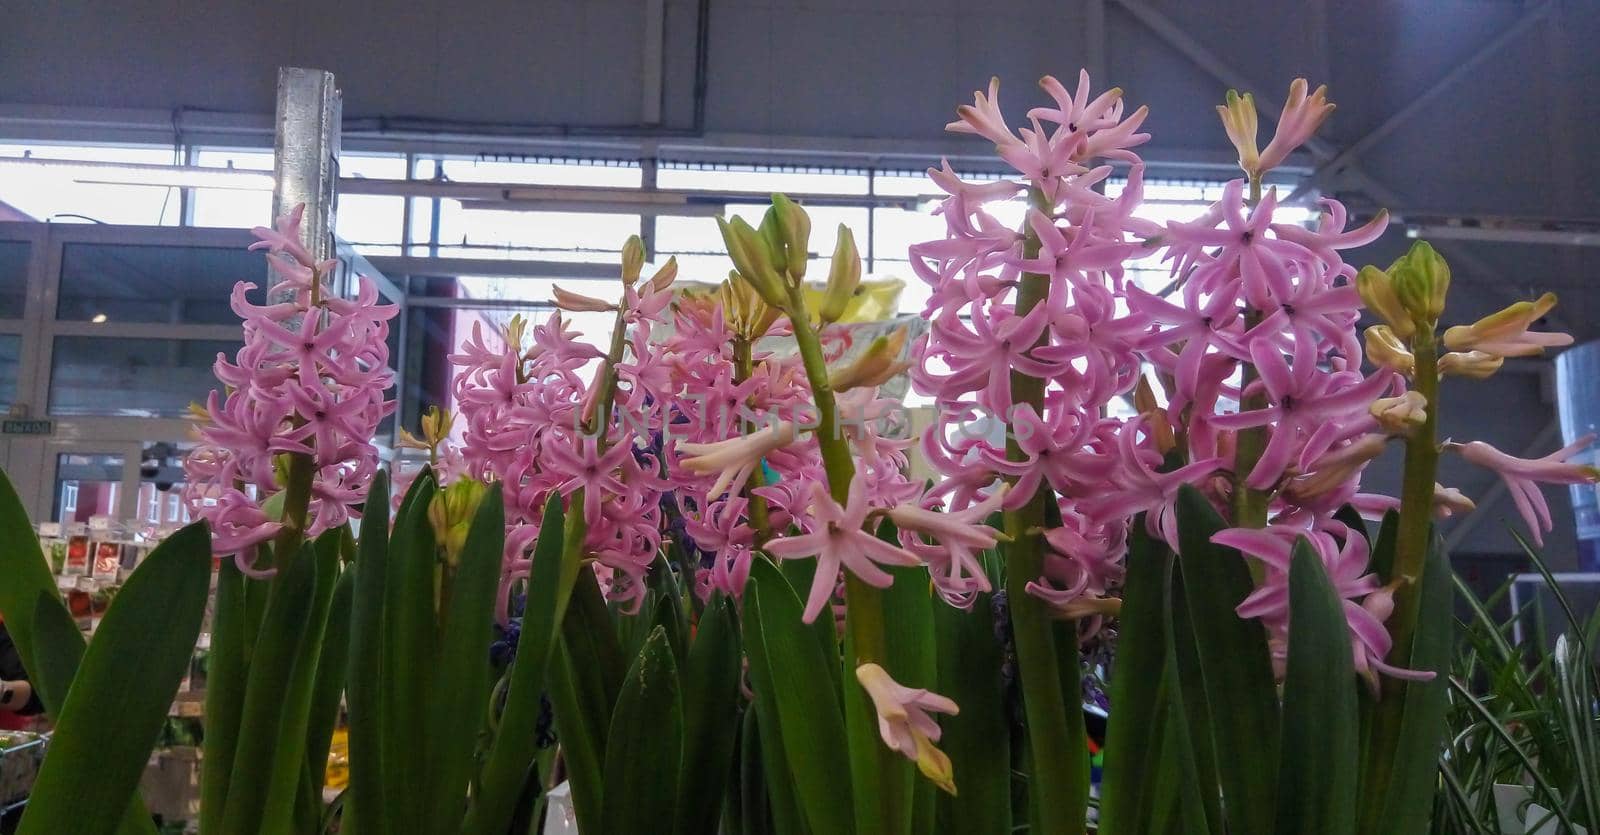 Pink hyacinths on the shelf in the store.The first spring flower.